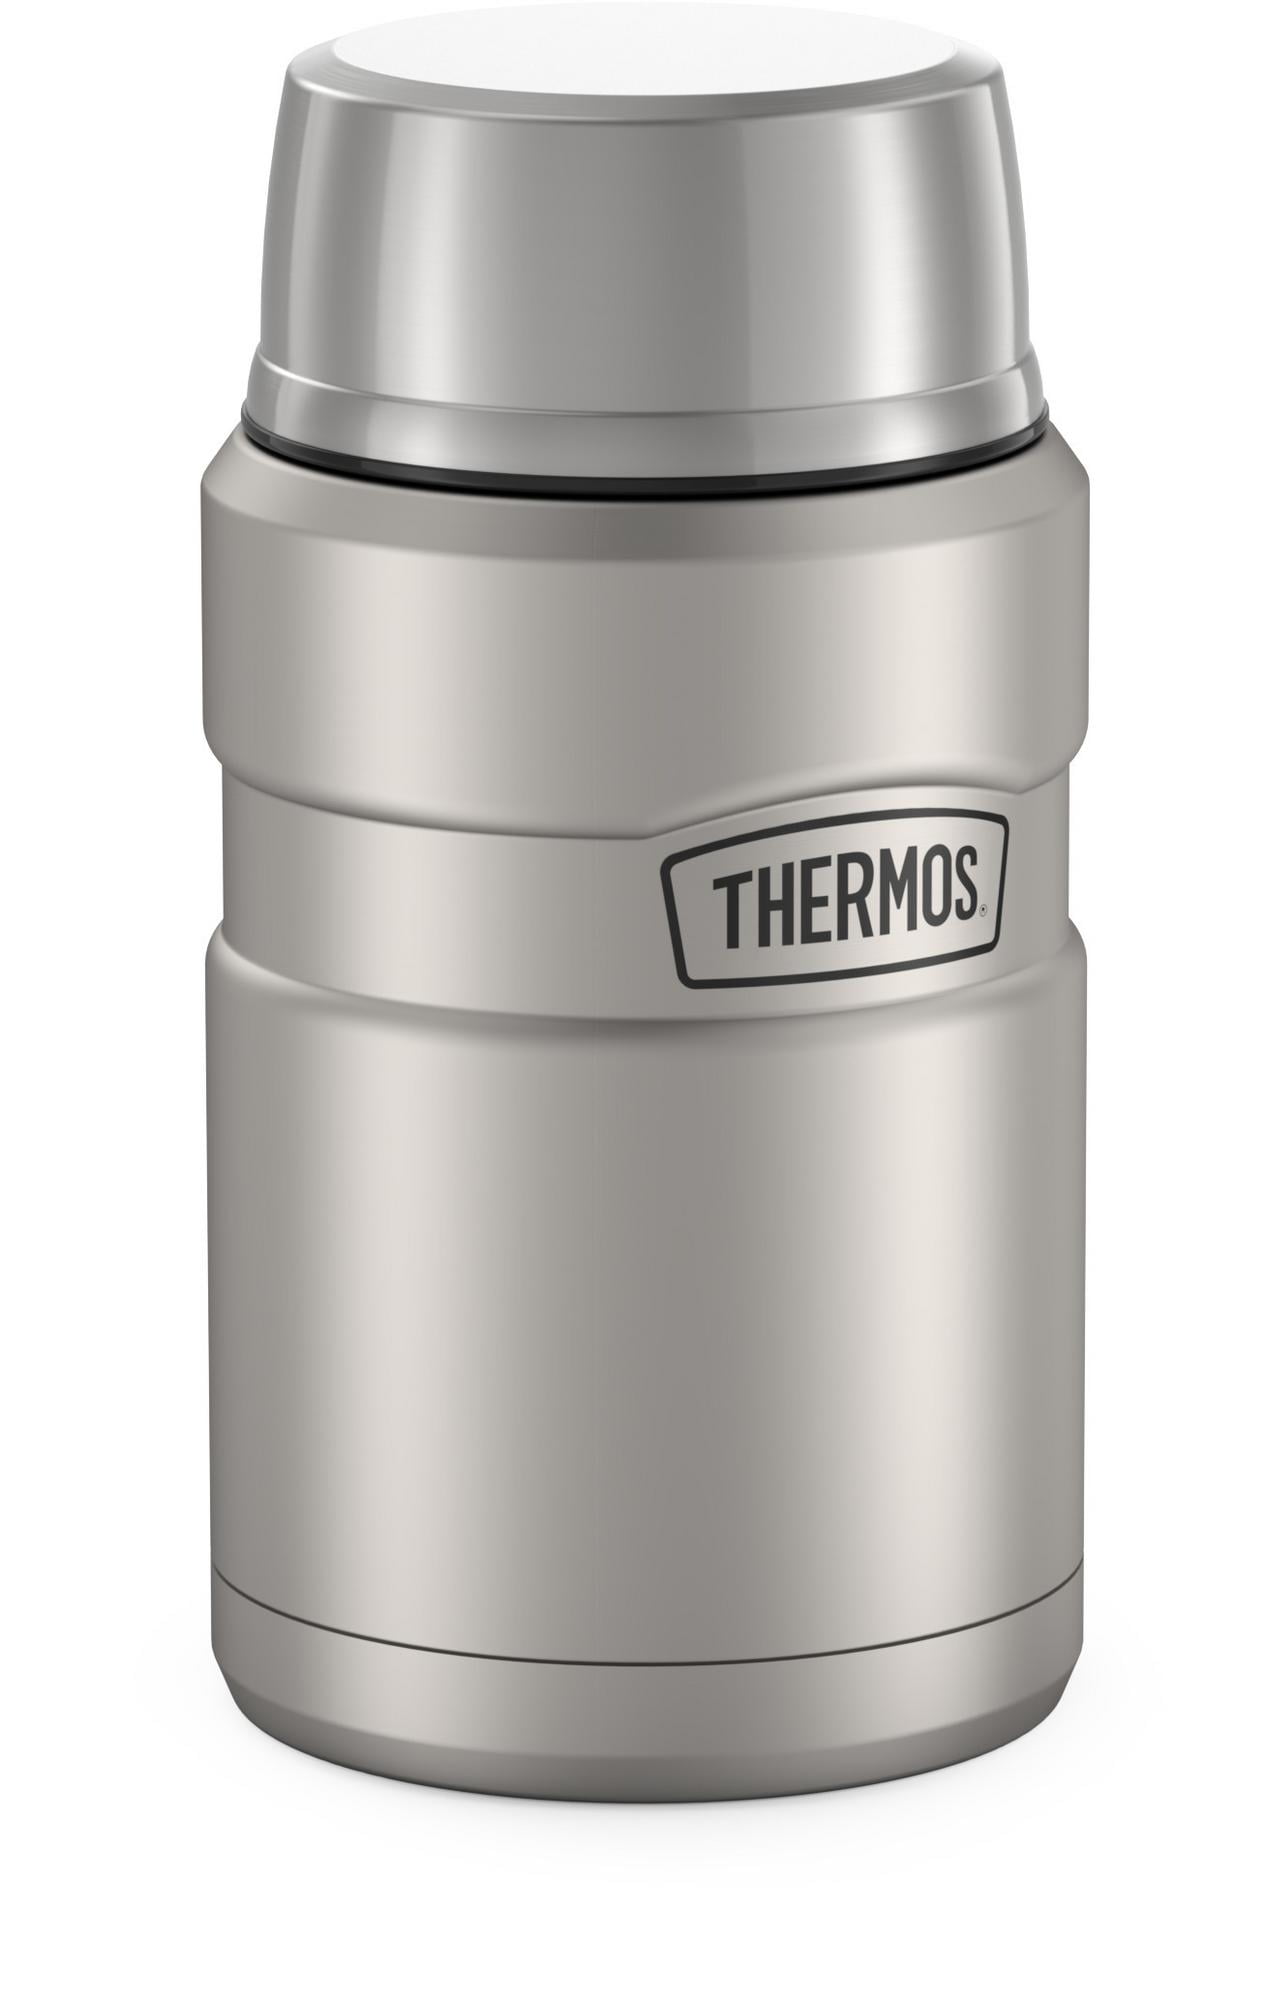 Thermos Stainless King 24-Oz. Vacuum-Insulated Stainless Steel Food Jar